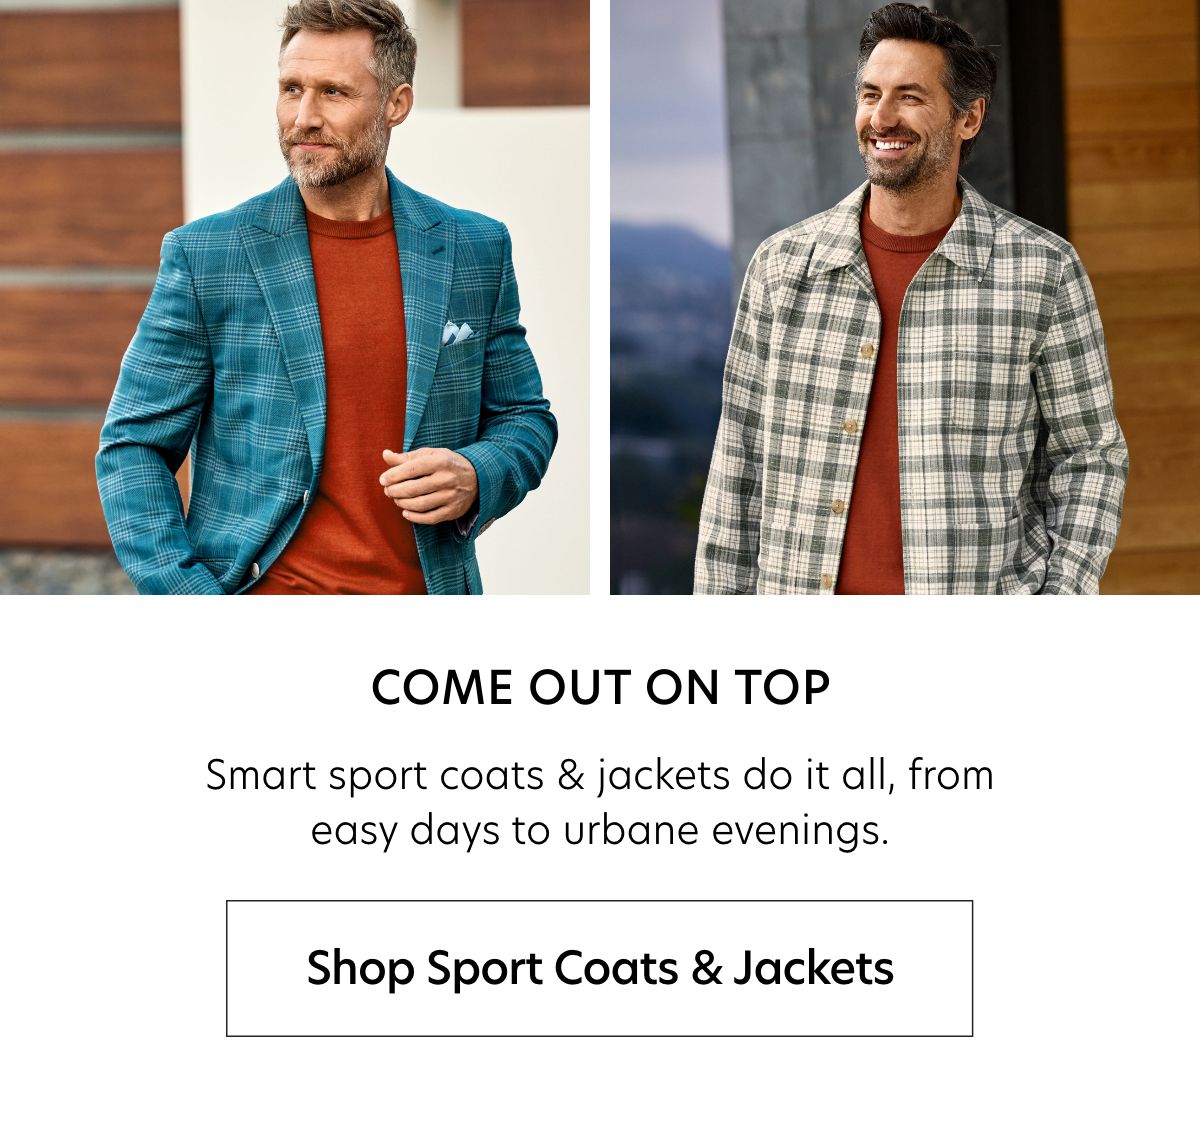  COME OUT ON TOP Smart sport coats jackets do it all, from easy days to urbane evenings. Shop Sport Coats Jackets 